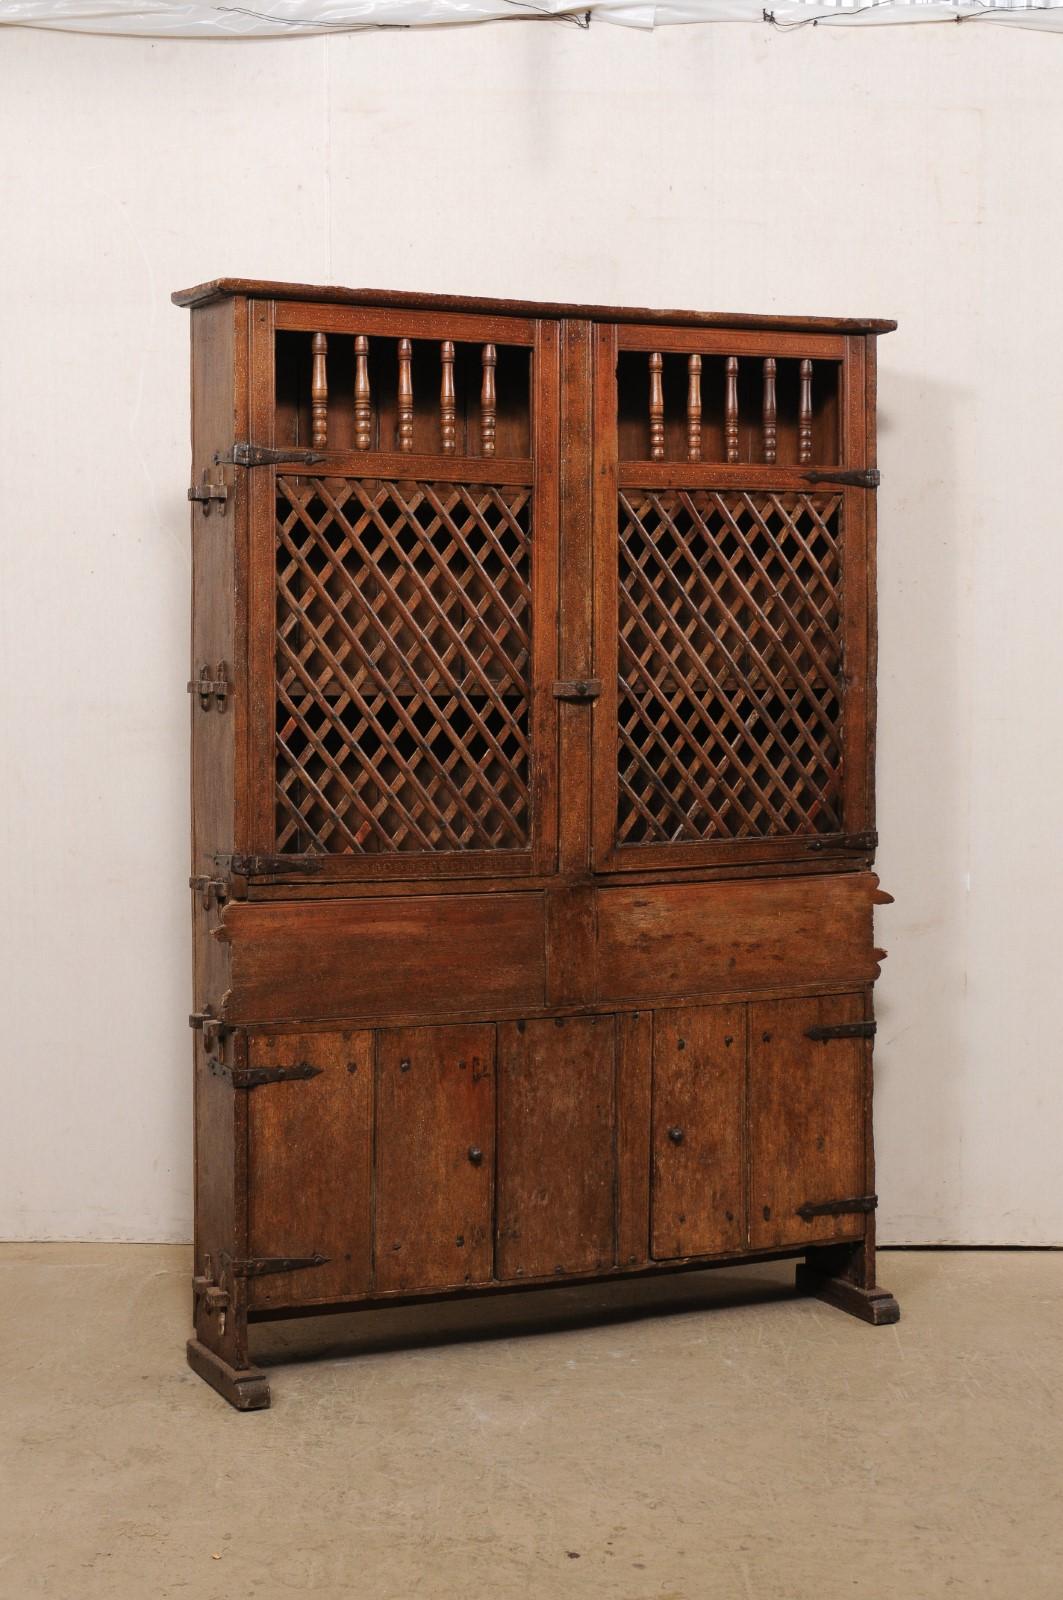 A tall Italian wooden storage and display cabinet from the early 18th century. This antique cabinet from Italy, which stands approximately 6.75 feet tall, has a flat top and upper section is fitted with a pair of wooden doors with spindle tops over